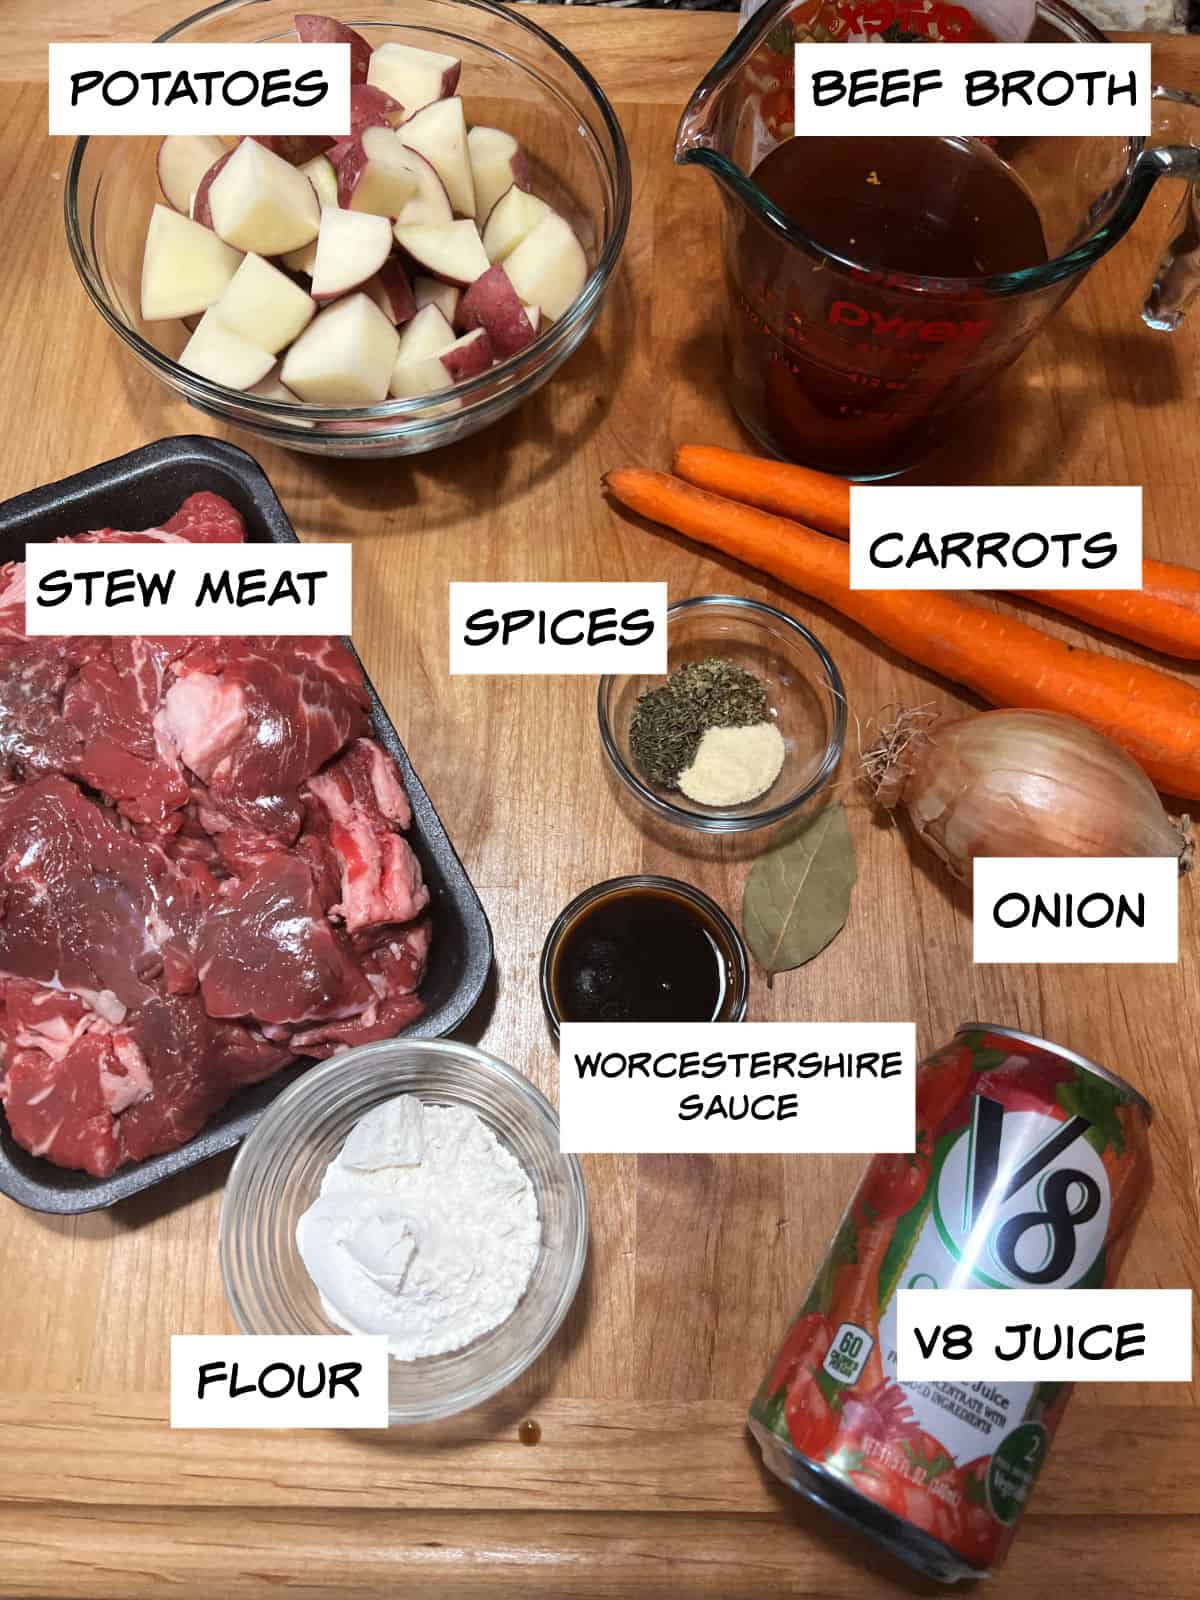 ingredients: potatoes, broth, carrots, onion, stew meat, V8, flour, worcestershire, and spices.